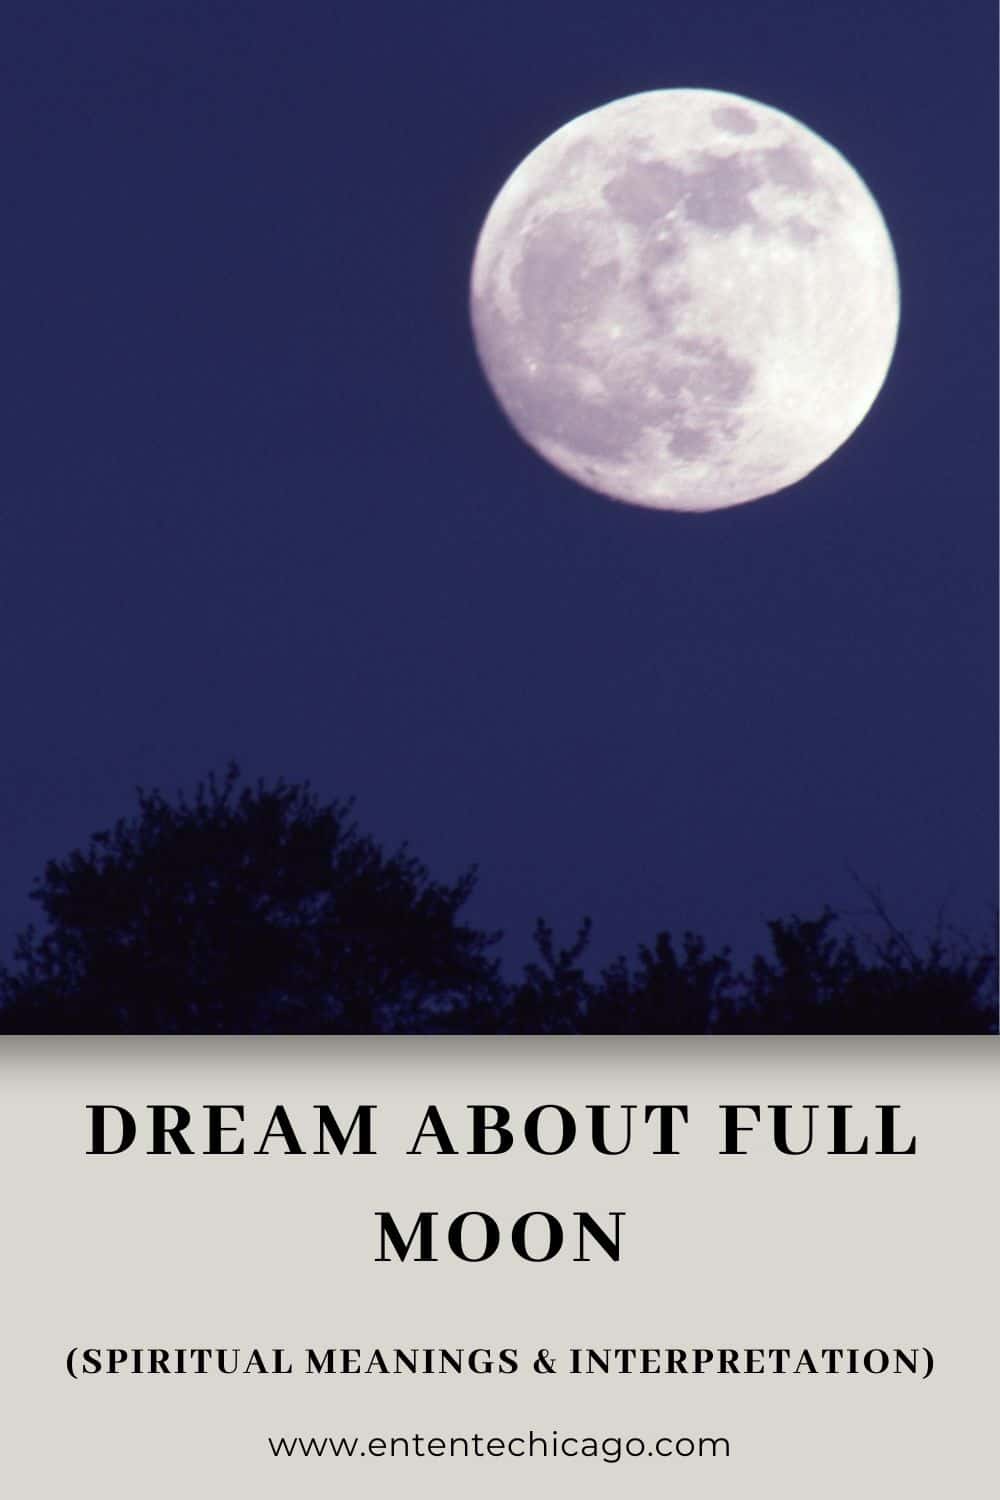 What is a full moon?